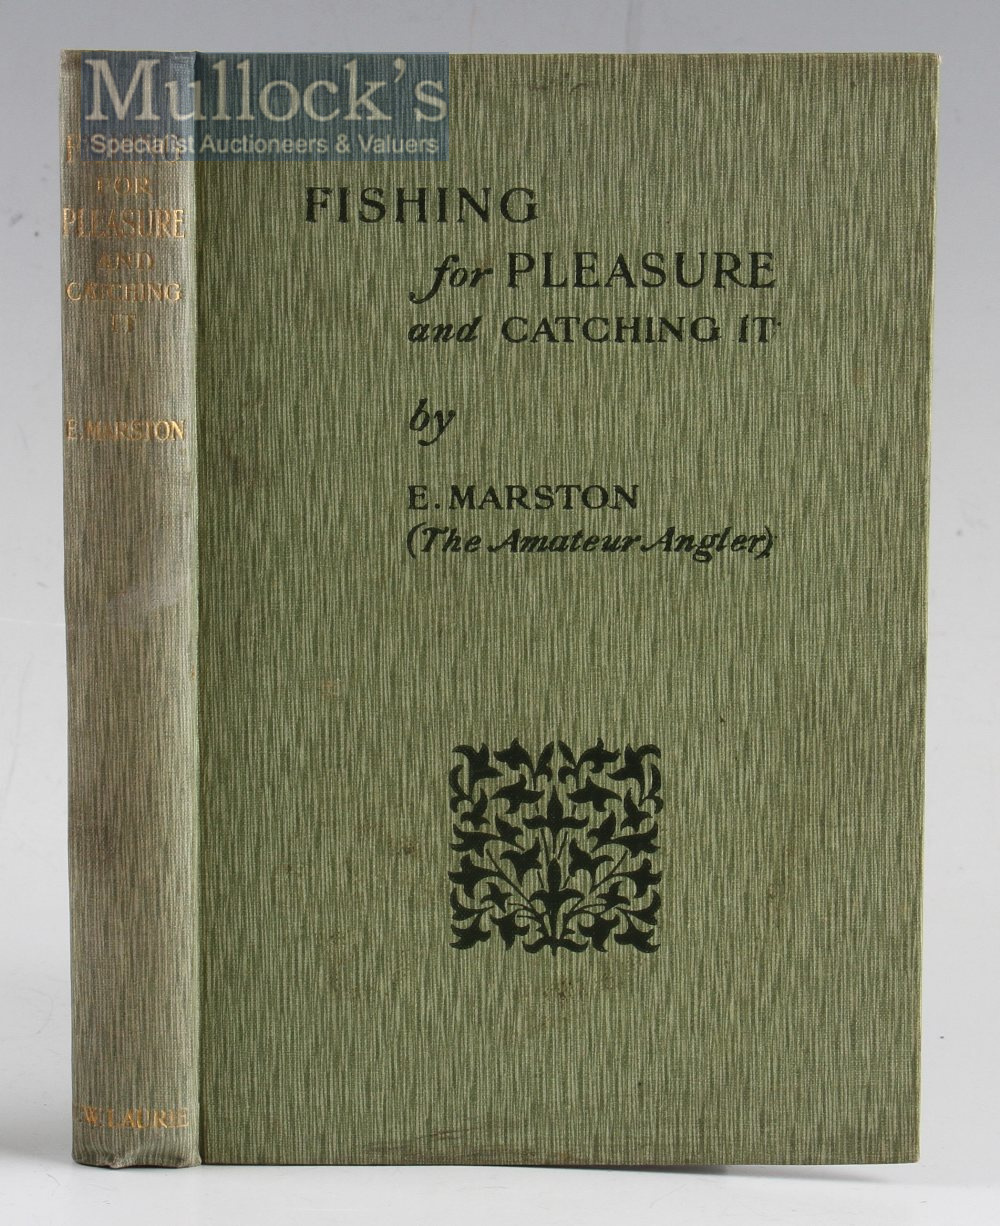 Fishing Book - Fishing Book - Marston, E. – “Fishing for Pleasure and Catching It” 1906 in